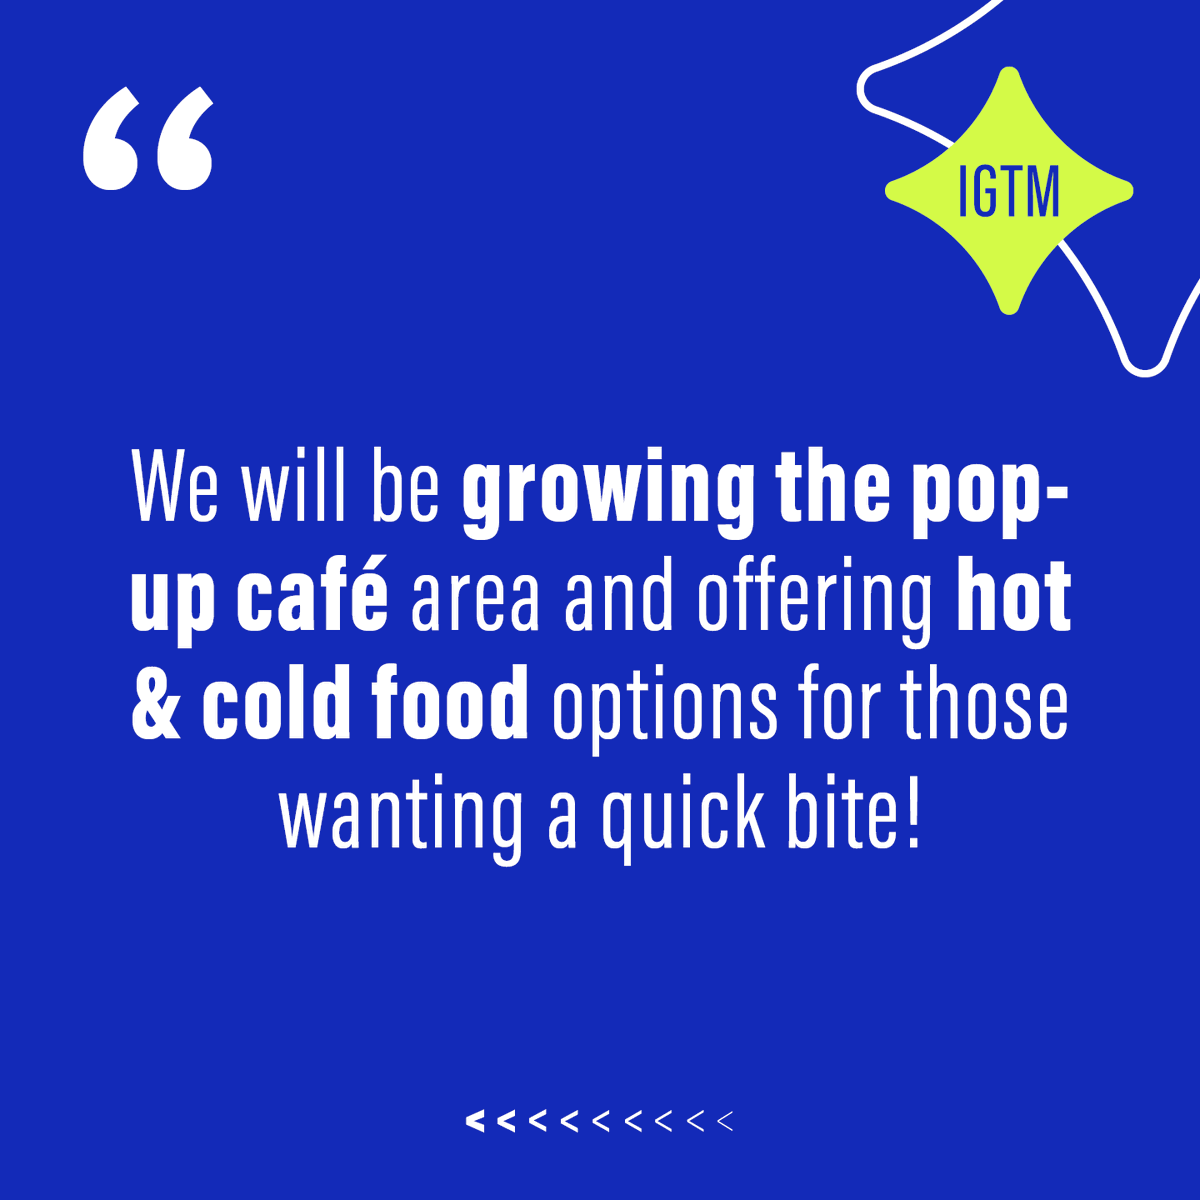 You raved about the free coffee but were disappointed by the lack of catering. That’s why we’ll be growing the pop-up café area to save on the wait times and offering hot & cold food options for those wanting a quick bite! ☕ 🥡 igtmarket.com #GolfTogether